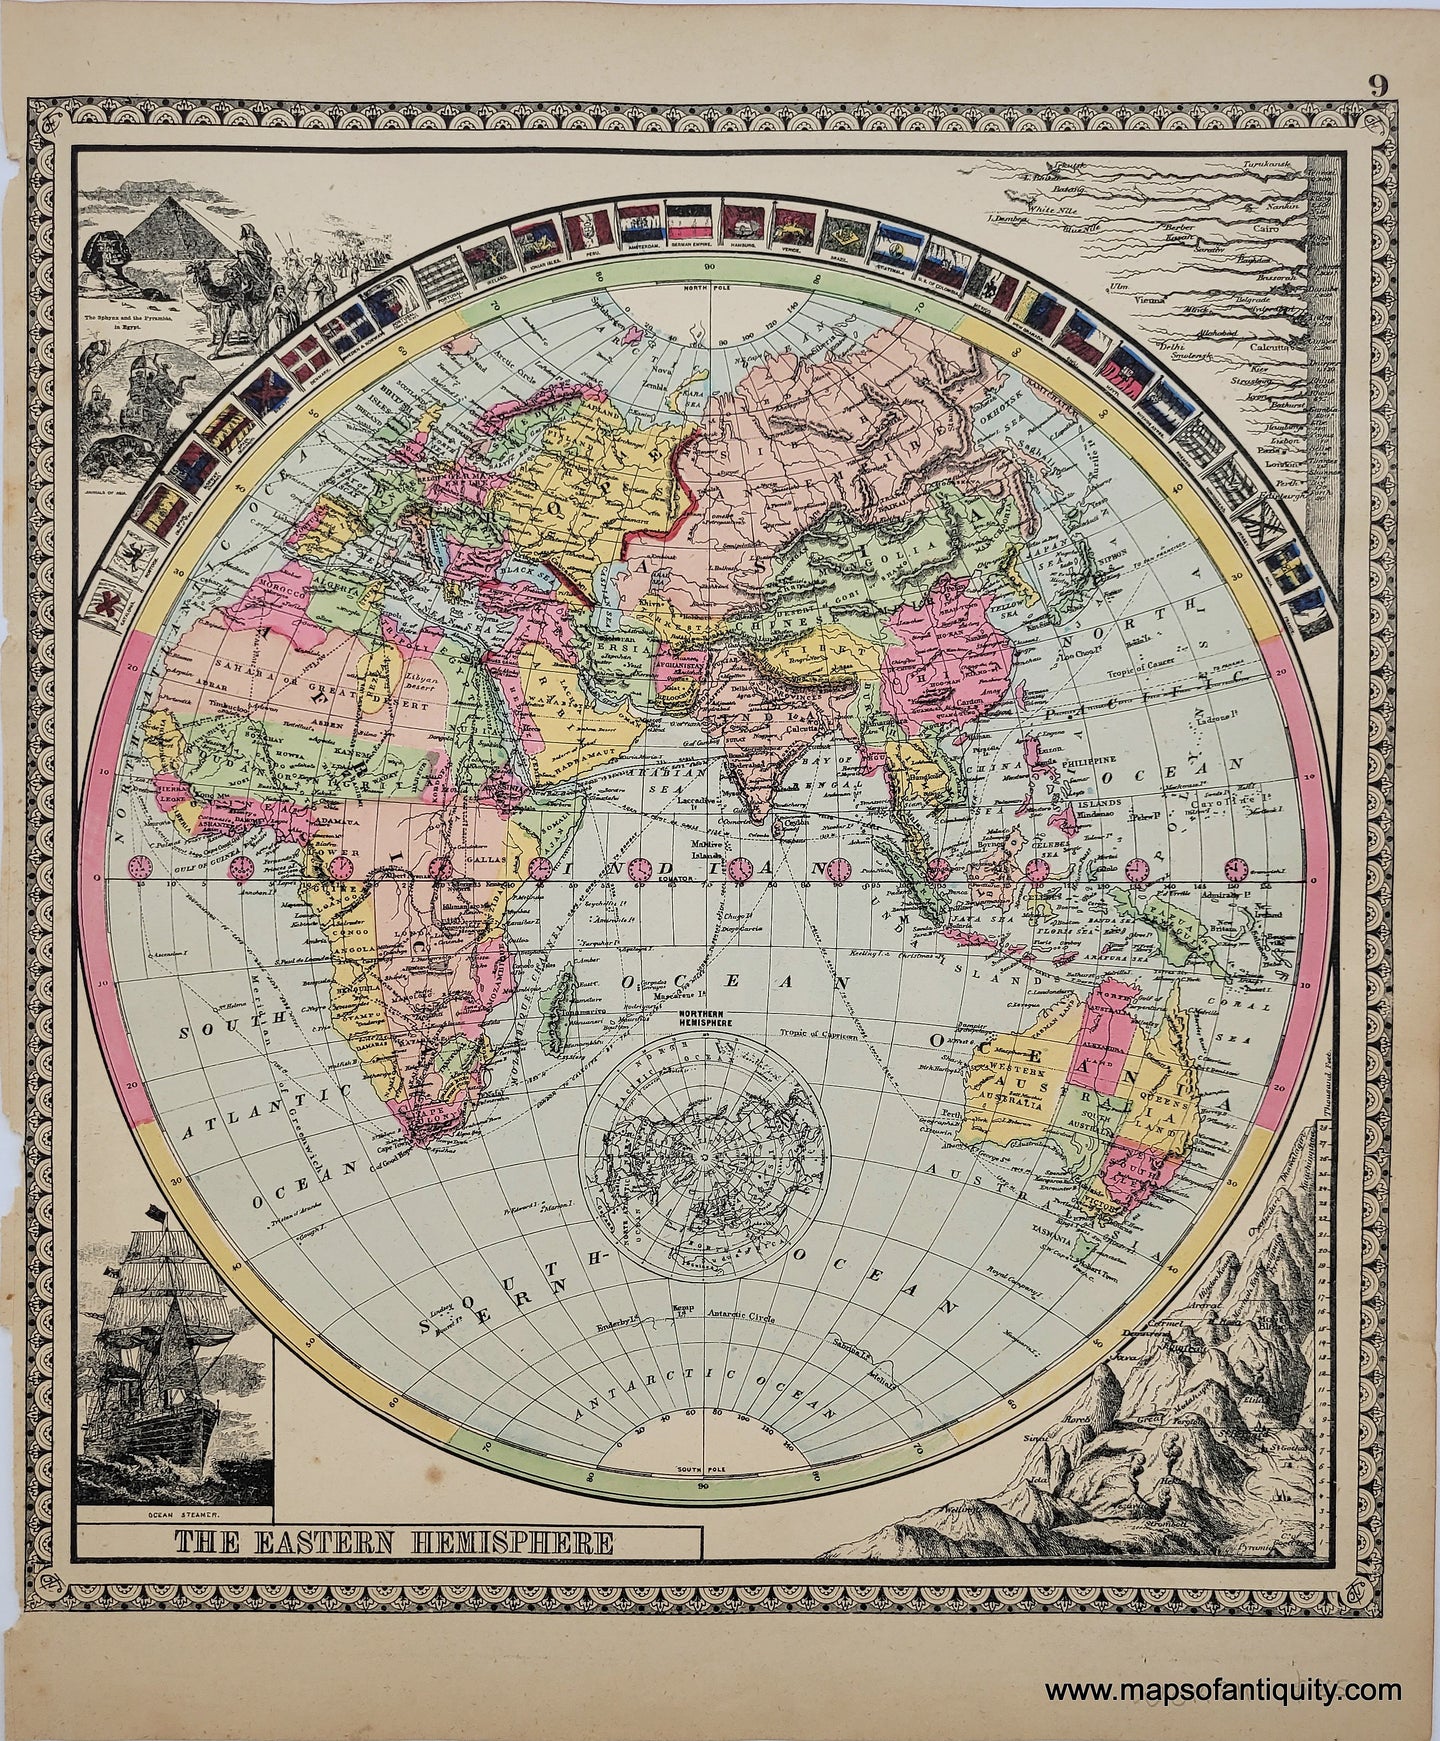 Antique double-sided sheet from Tunison's Peerless Universal Atlas of the World, 1887 by H.C. Tunison. On one side is a map of the Eastern Hemisphere with flags and comparative rivers and mountains, on the other side is a map of Palestine and a view of the Holy Land with numbered key. Vibrant original color. 